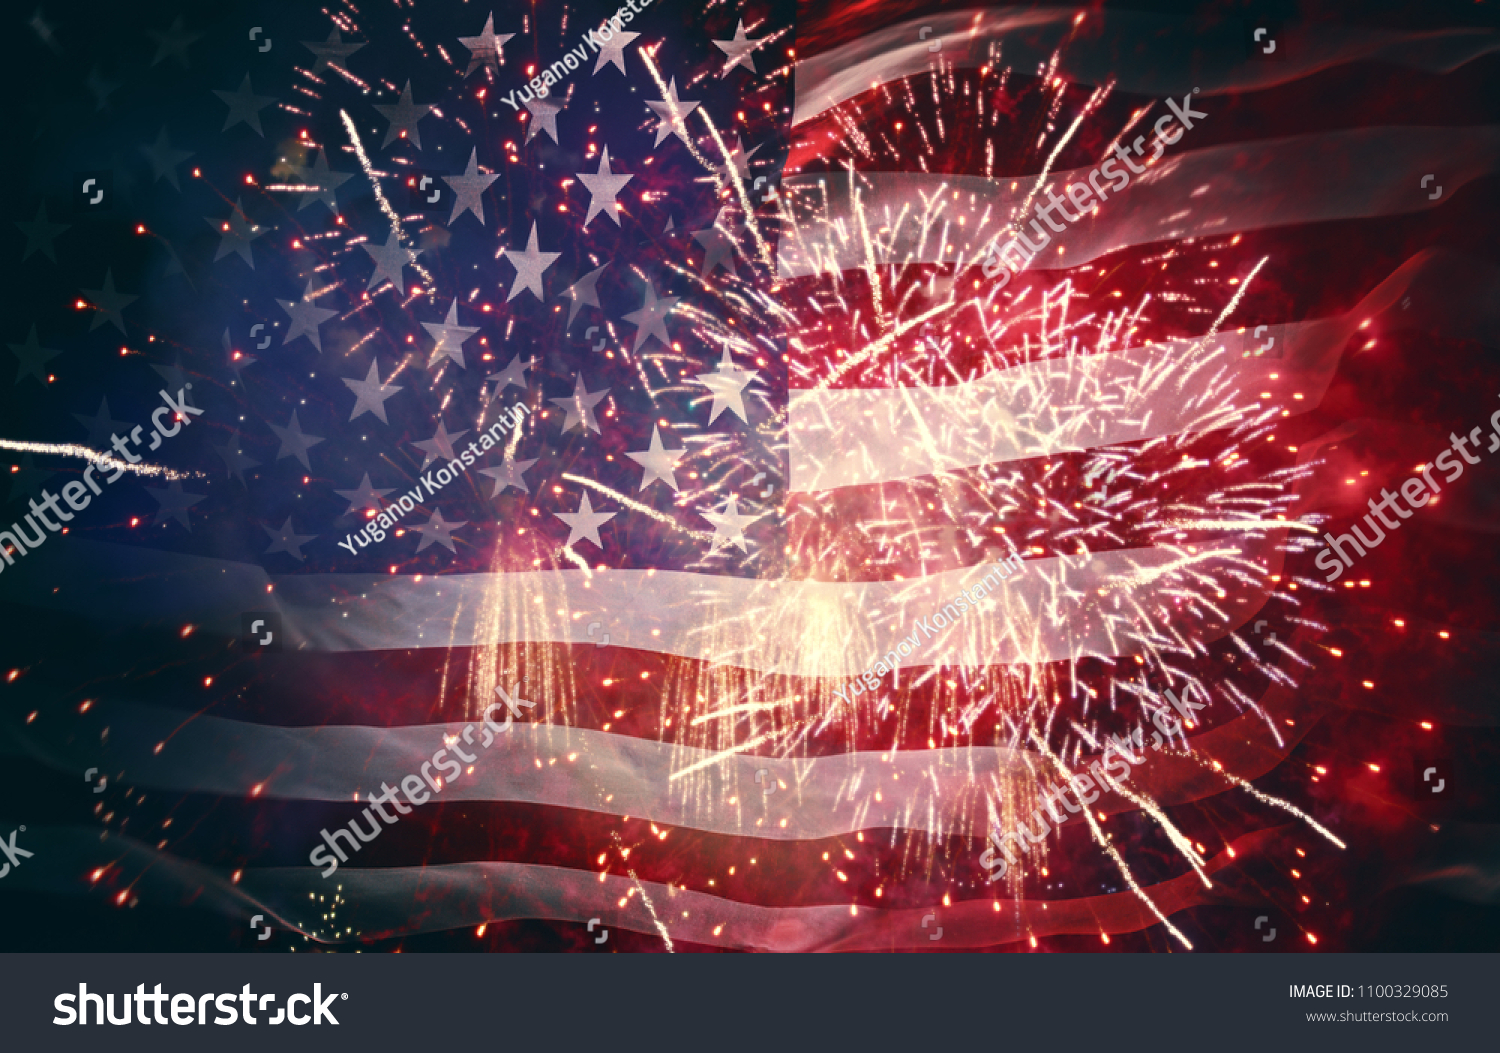 Patriotic holiday. The USA are celebrating 4th of July. American flag on background of fireworks. #1100329085